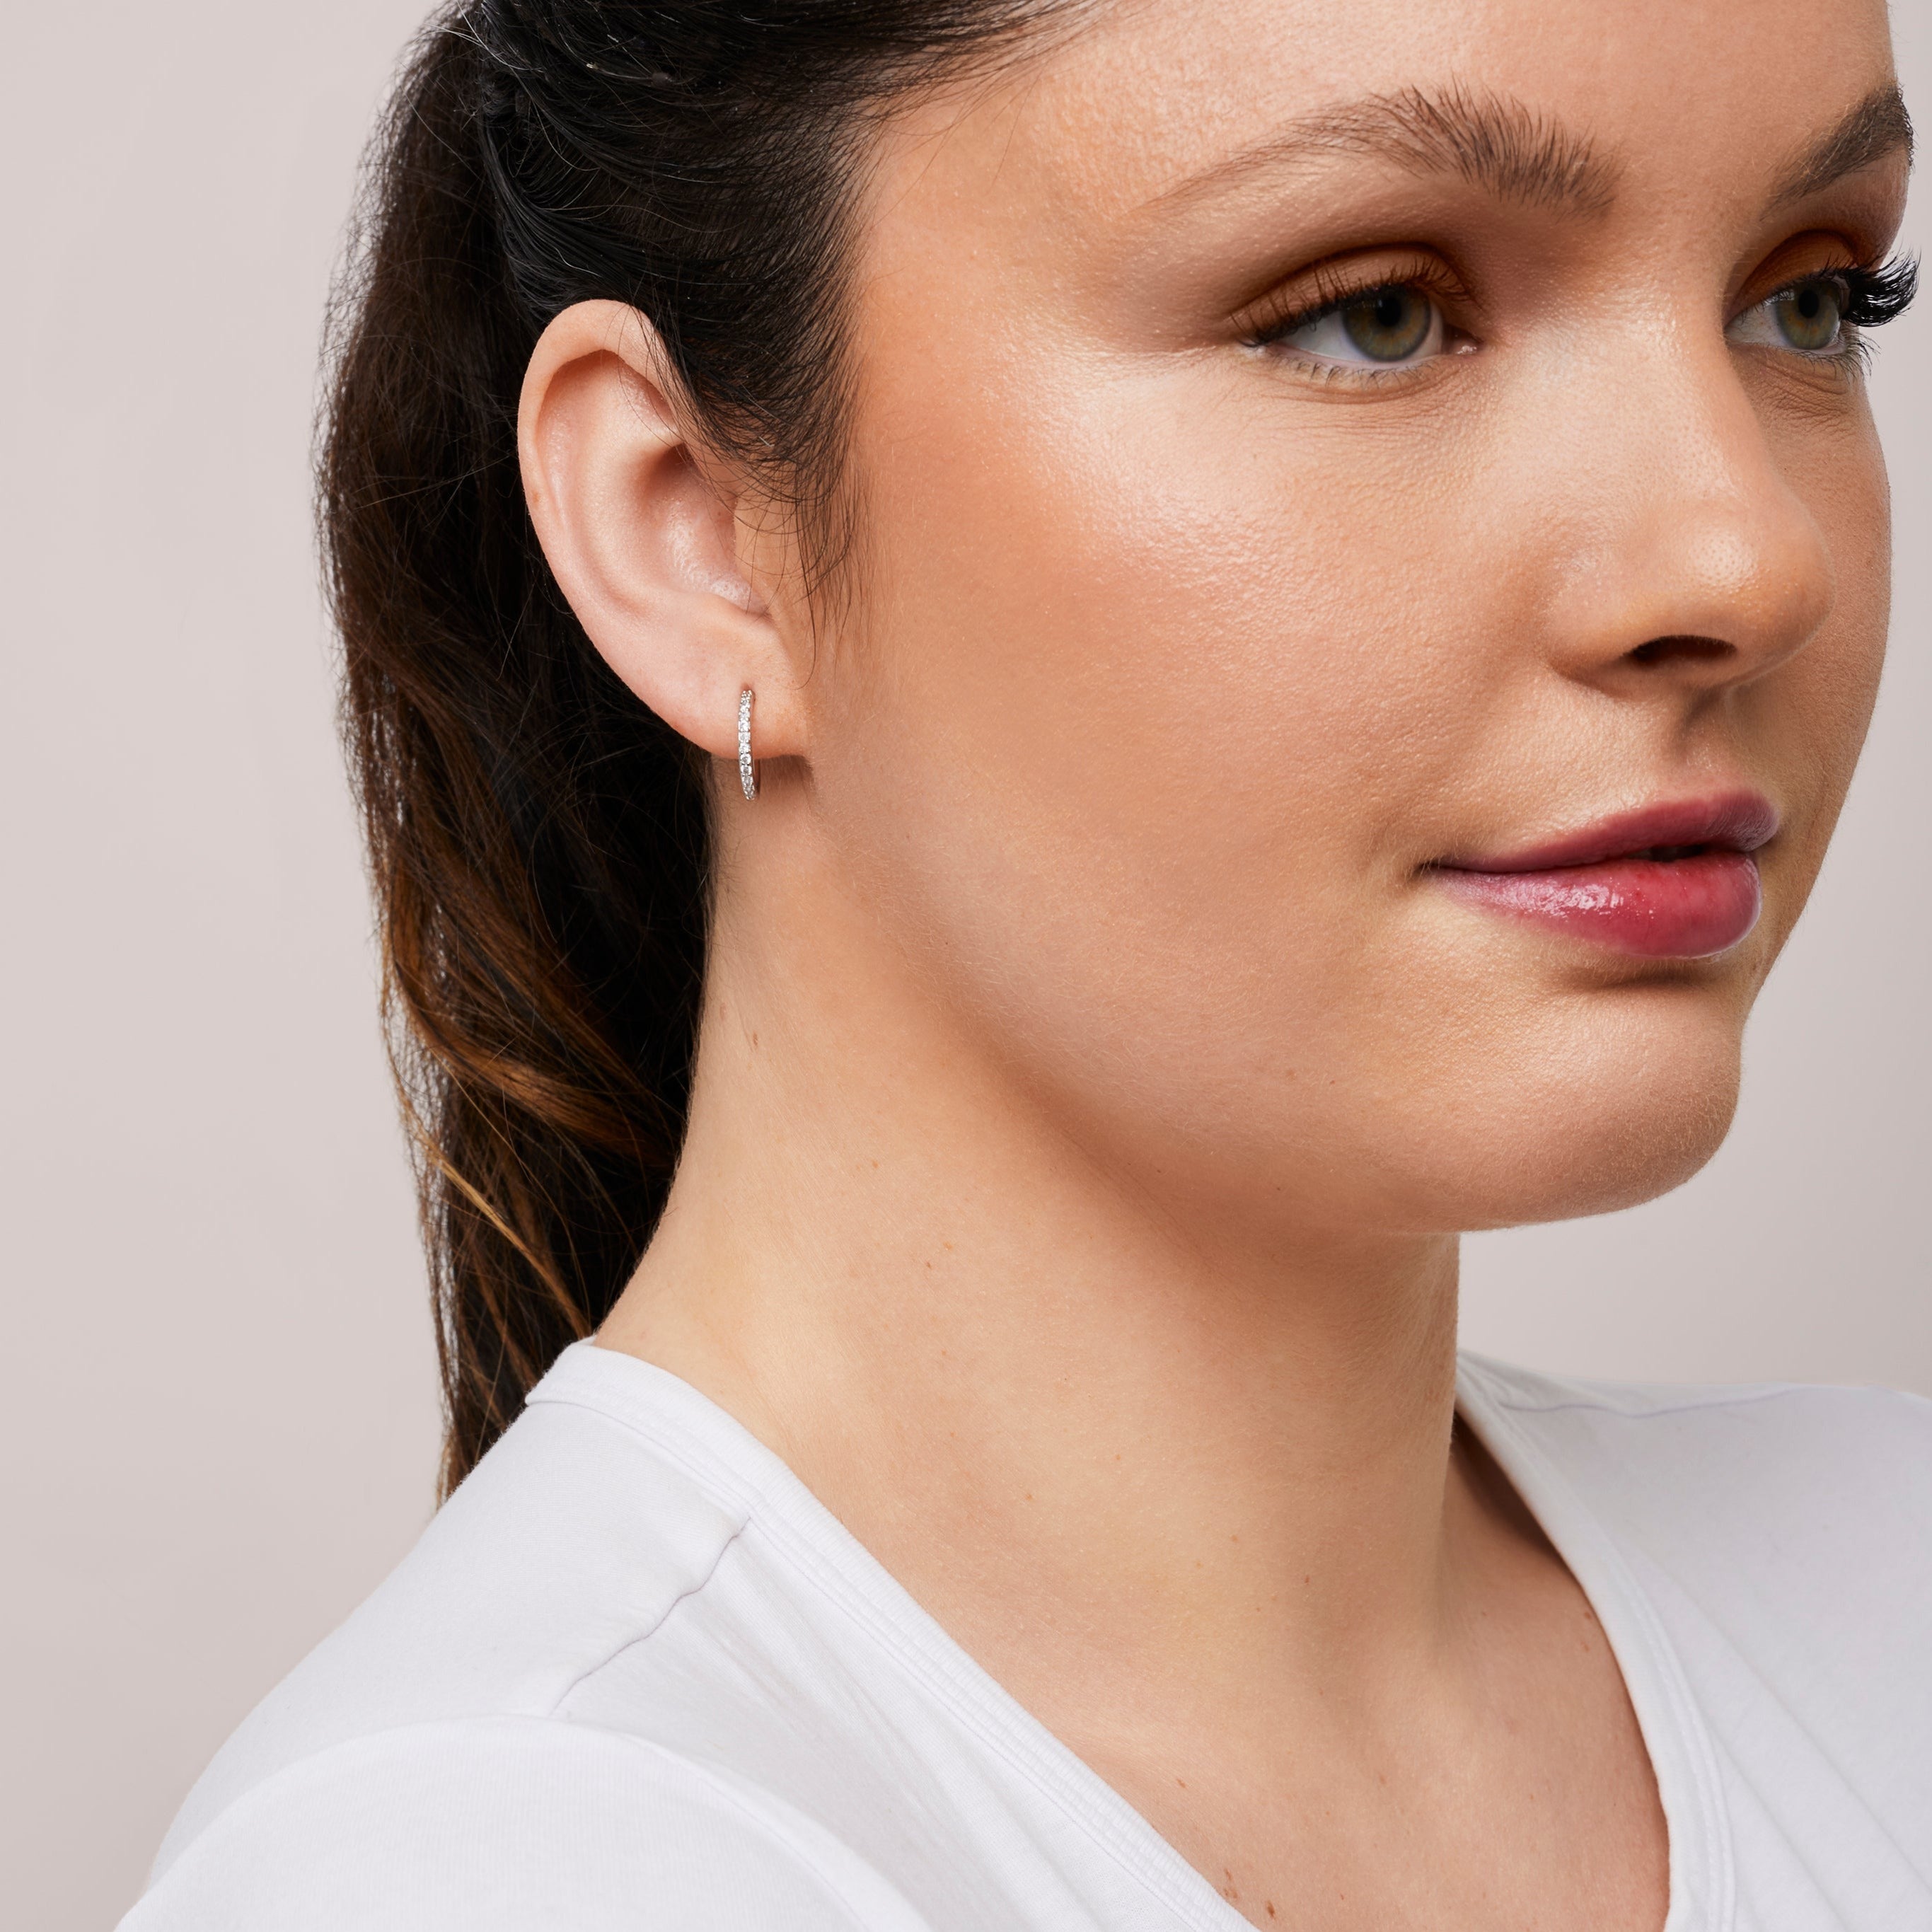 A model wearing the Medium Pavé Hoop Clip On Earrings in Silver offer a Mosquito Coil Clip-On Closure, making them ideal for Thick/Large Ears, Sensitive Ears, Small/Thin Ears, Stretched/Healing Ears, and Keloid Prone Ears. They provide an average comfortable wear duration of 24 hours with a medium secure hold, and can be gently adjusted by squeezing the padding forward once on the ear. Please note that this item is only one pair.